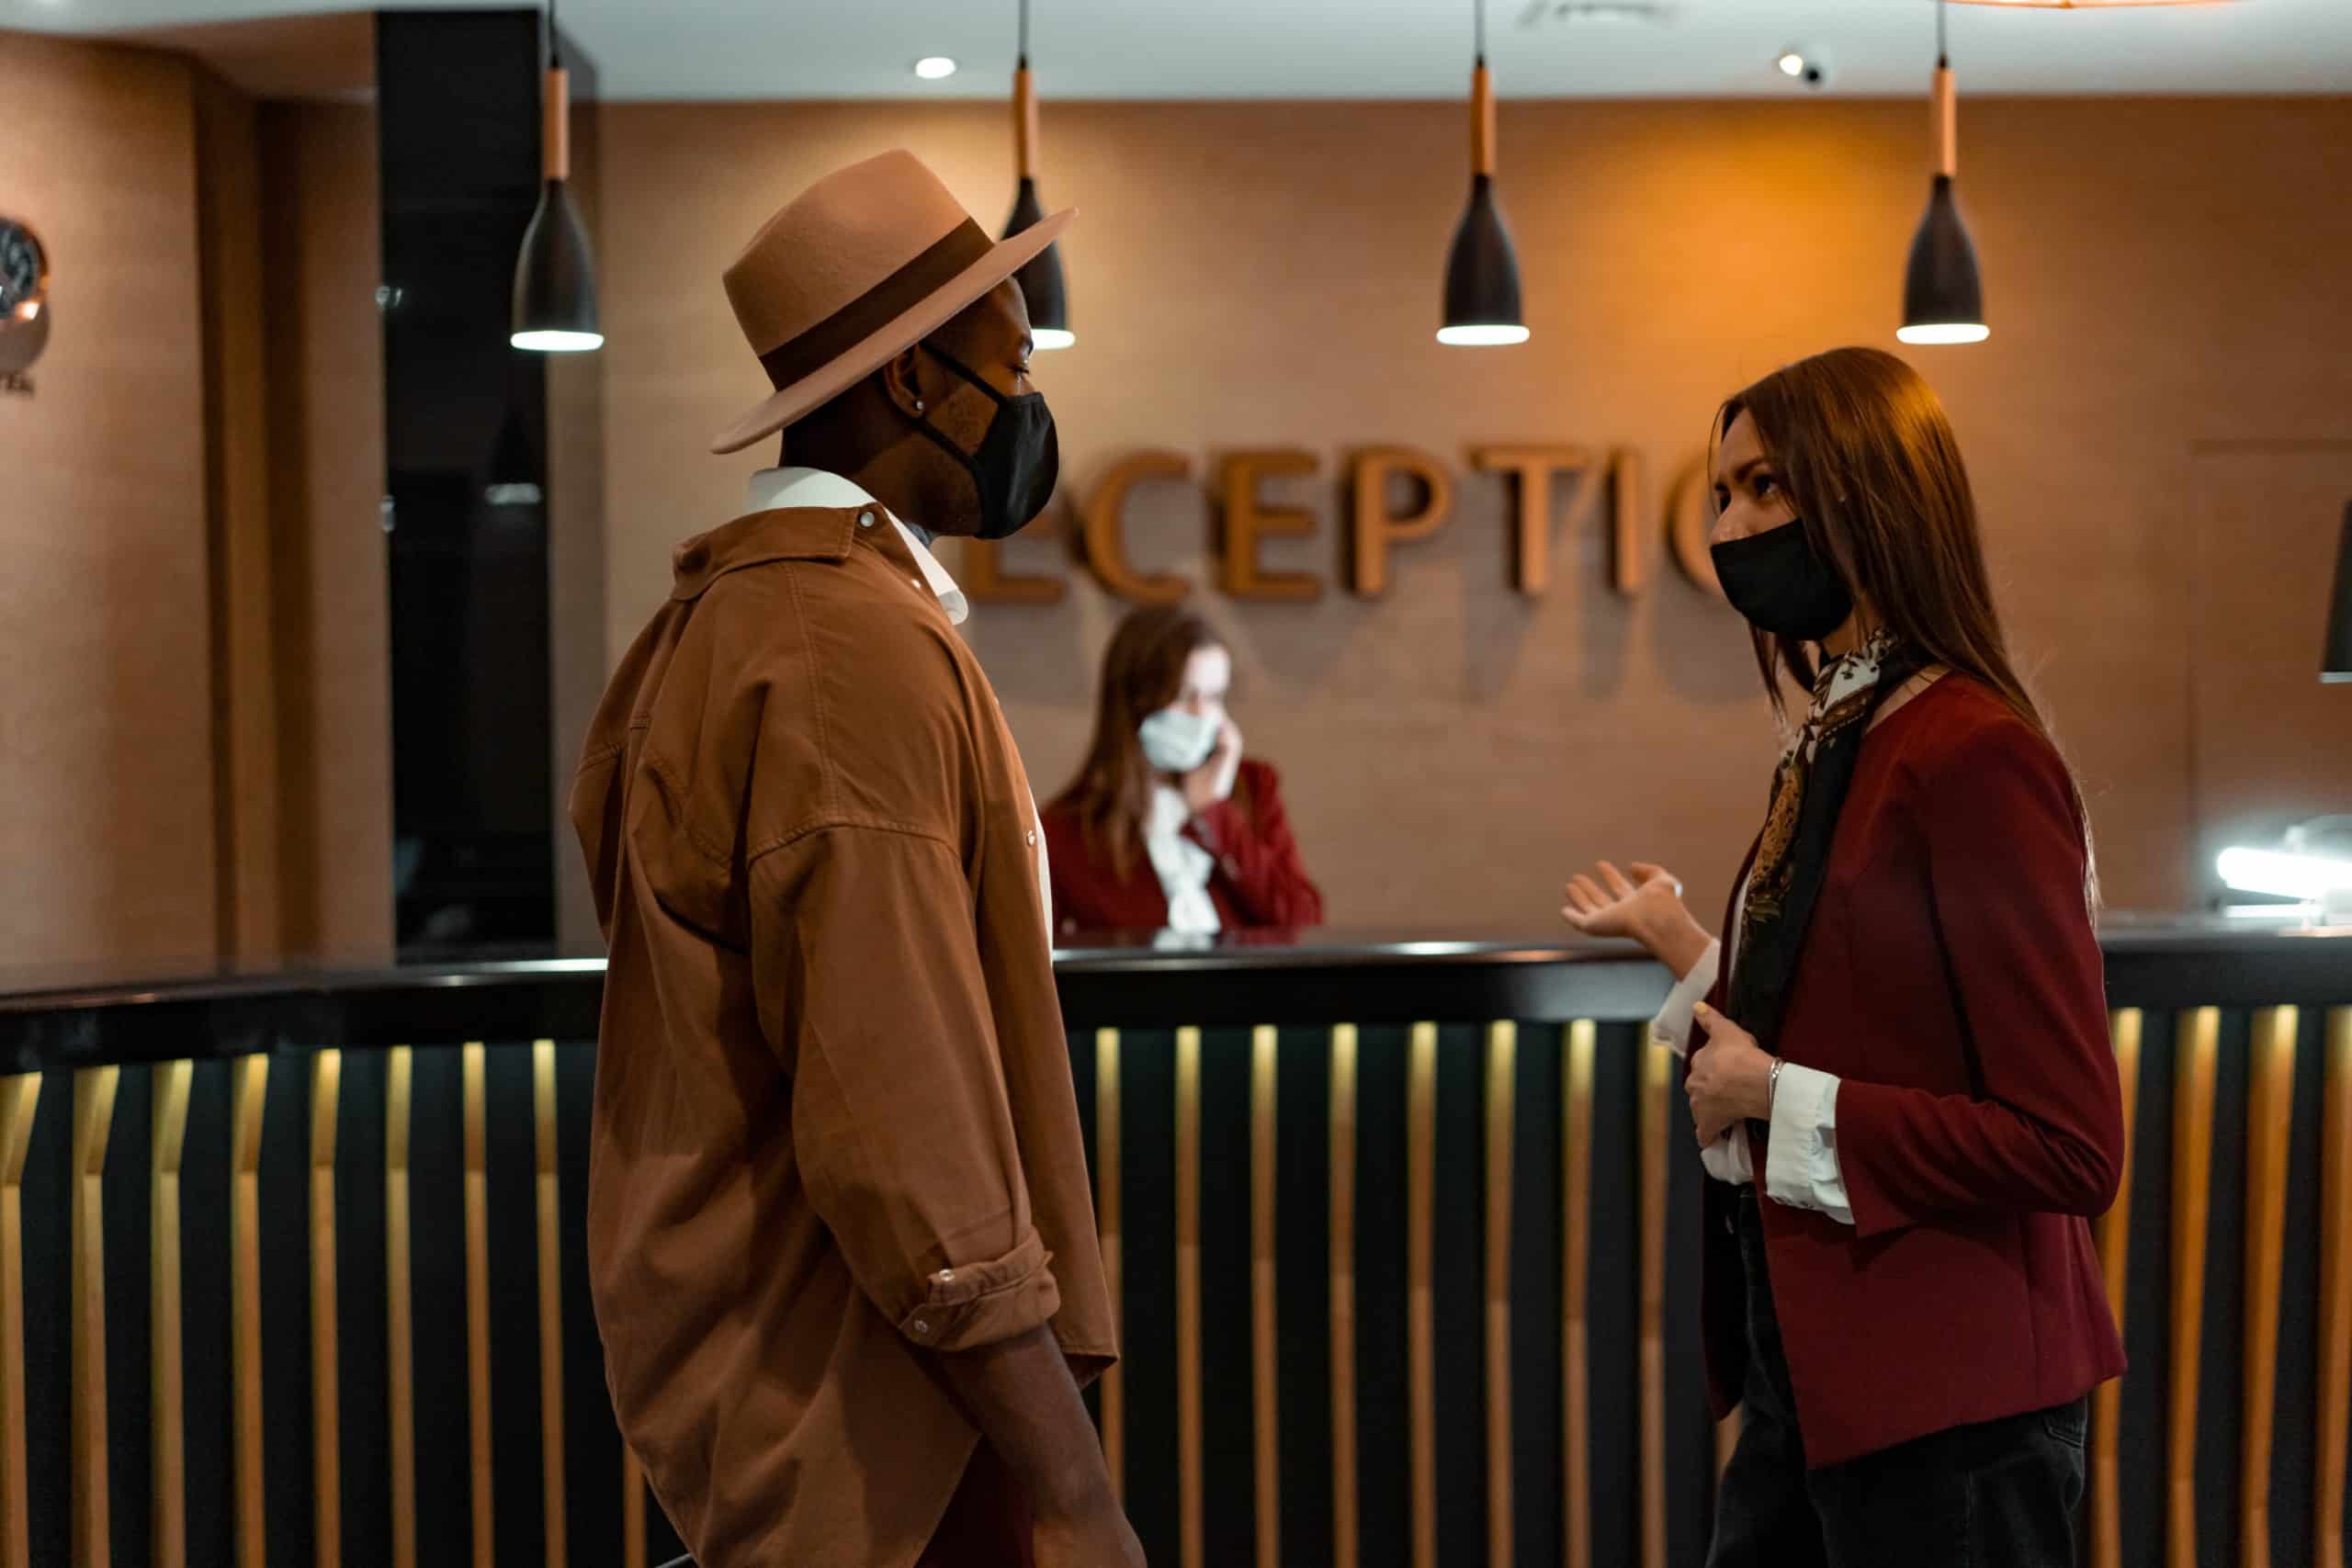 Man and woman talking at a hotel reception area